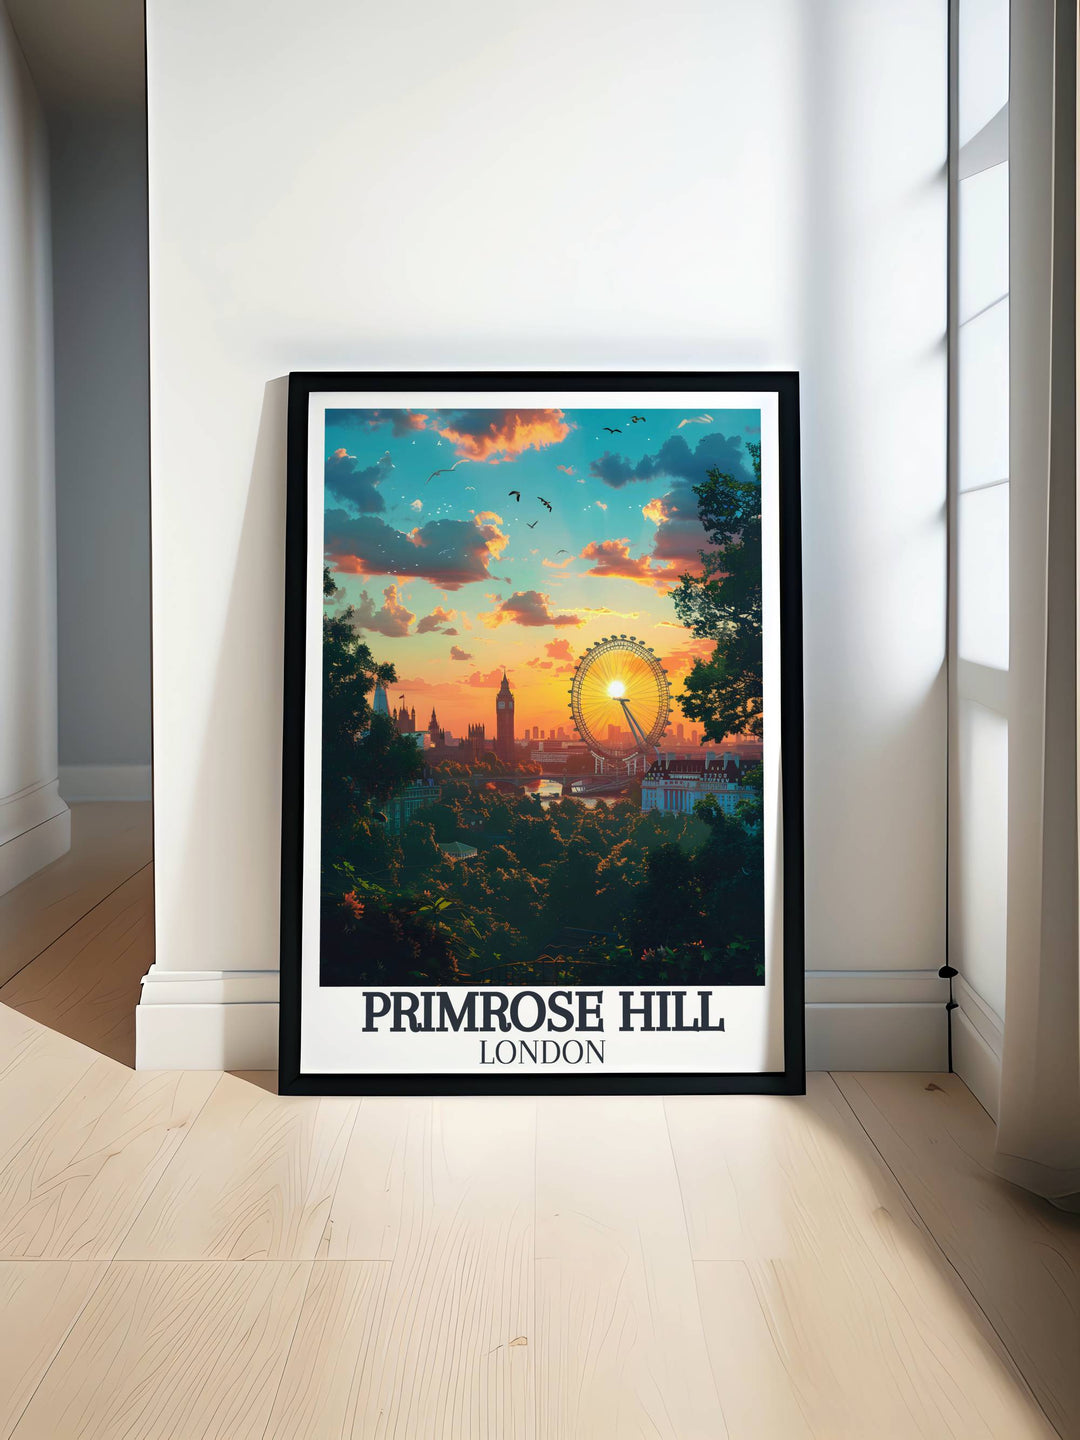 Primrose Hill travel poster showcasing panoramic views of Londons skyline with lush greenery and vibrant atmosphere of Camden Town.